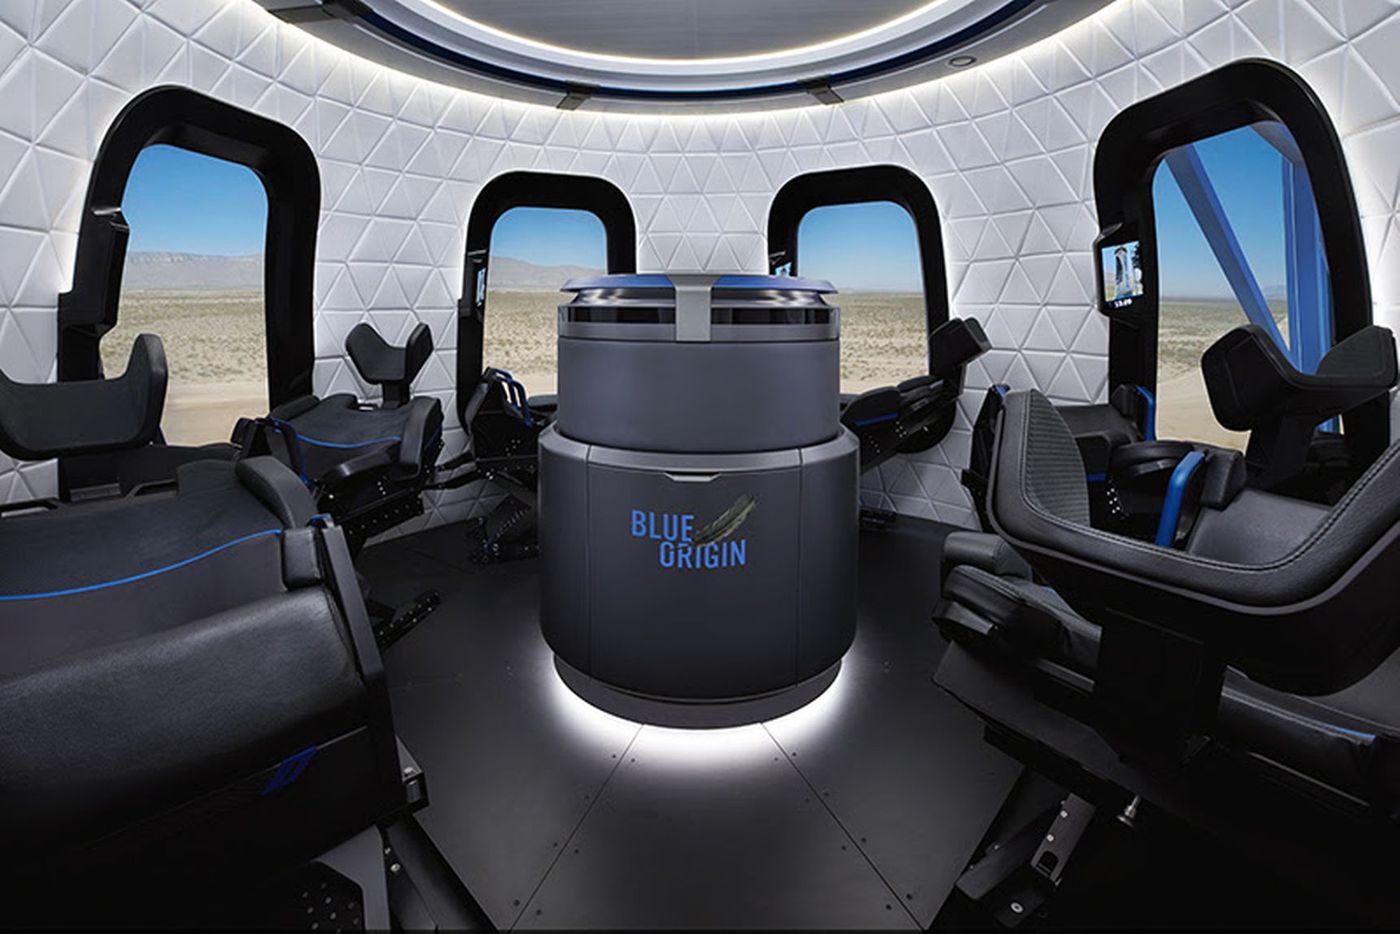 The inside of Blue Origin's space tourism capsule sure looks cozy, doesn't it?